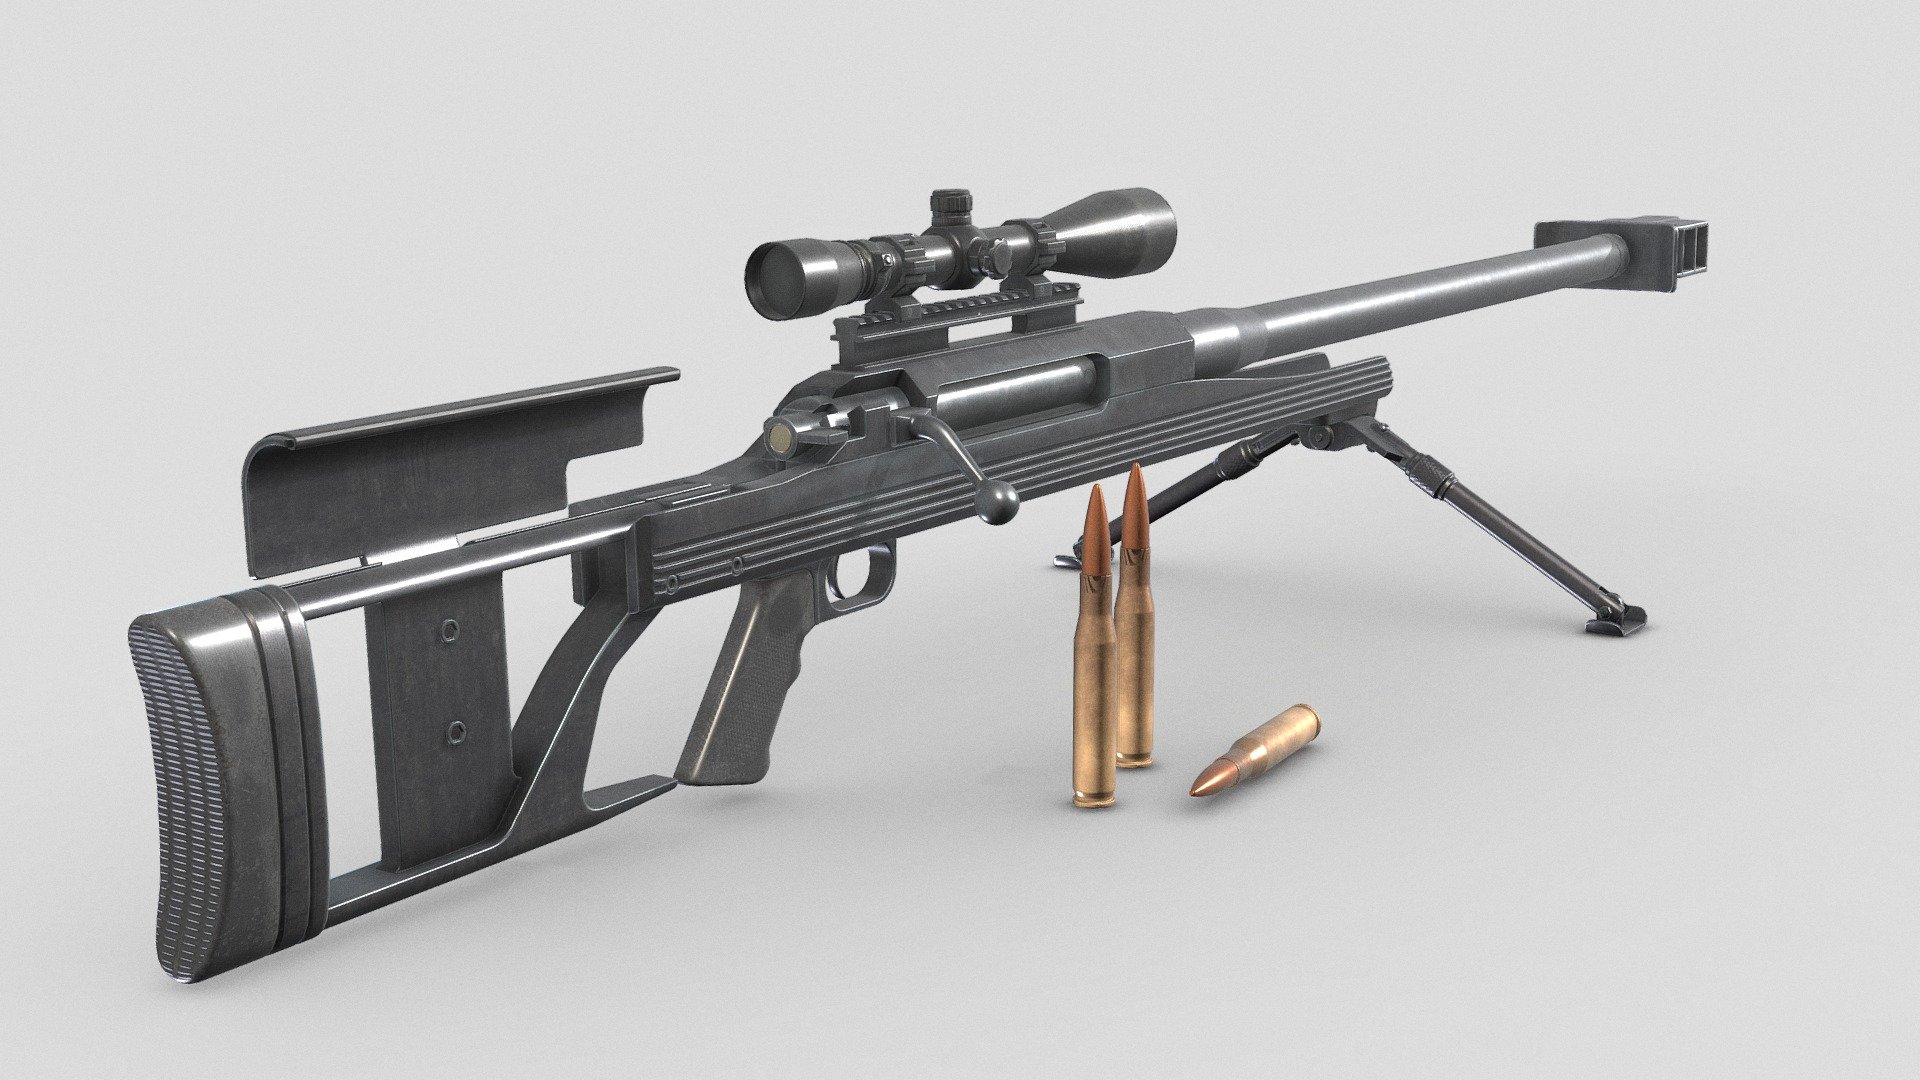 The ArmaLite AR-50 is a .50 BMG, single-shot, bolt-action anti-materiel precision rifle manufactured by ArmaLite.
The AR-50 rifle utilizes its weight and a large, fluted muzzle brake to reduce recoil. The AR-50 weighs approximately 34 pounds and is a single-shot bolt-action rifle. The barrel is thick and rigid, to prevent it from flexing. All AR-50 barrels use 1:15 right hand rifling.
The receiver features Armalite's octagonal design, which strengthens the receiver against flexing. The receiver is bedded to the V-shaped stock, whilst the barrel is free-floated above the forend. The three piece AR-50 stock is constructed from aluminum and features an extruded forend, as well as a skeleton butt stock with a removable and vertically adjustable butt plate 3d model